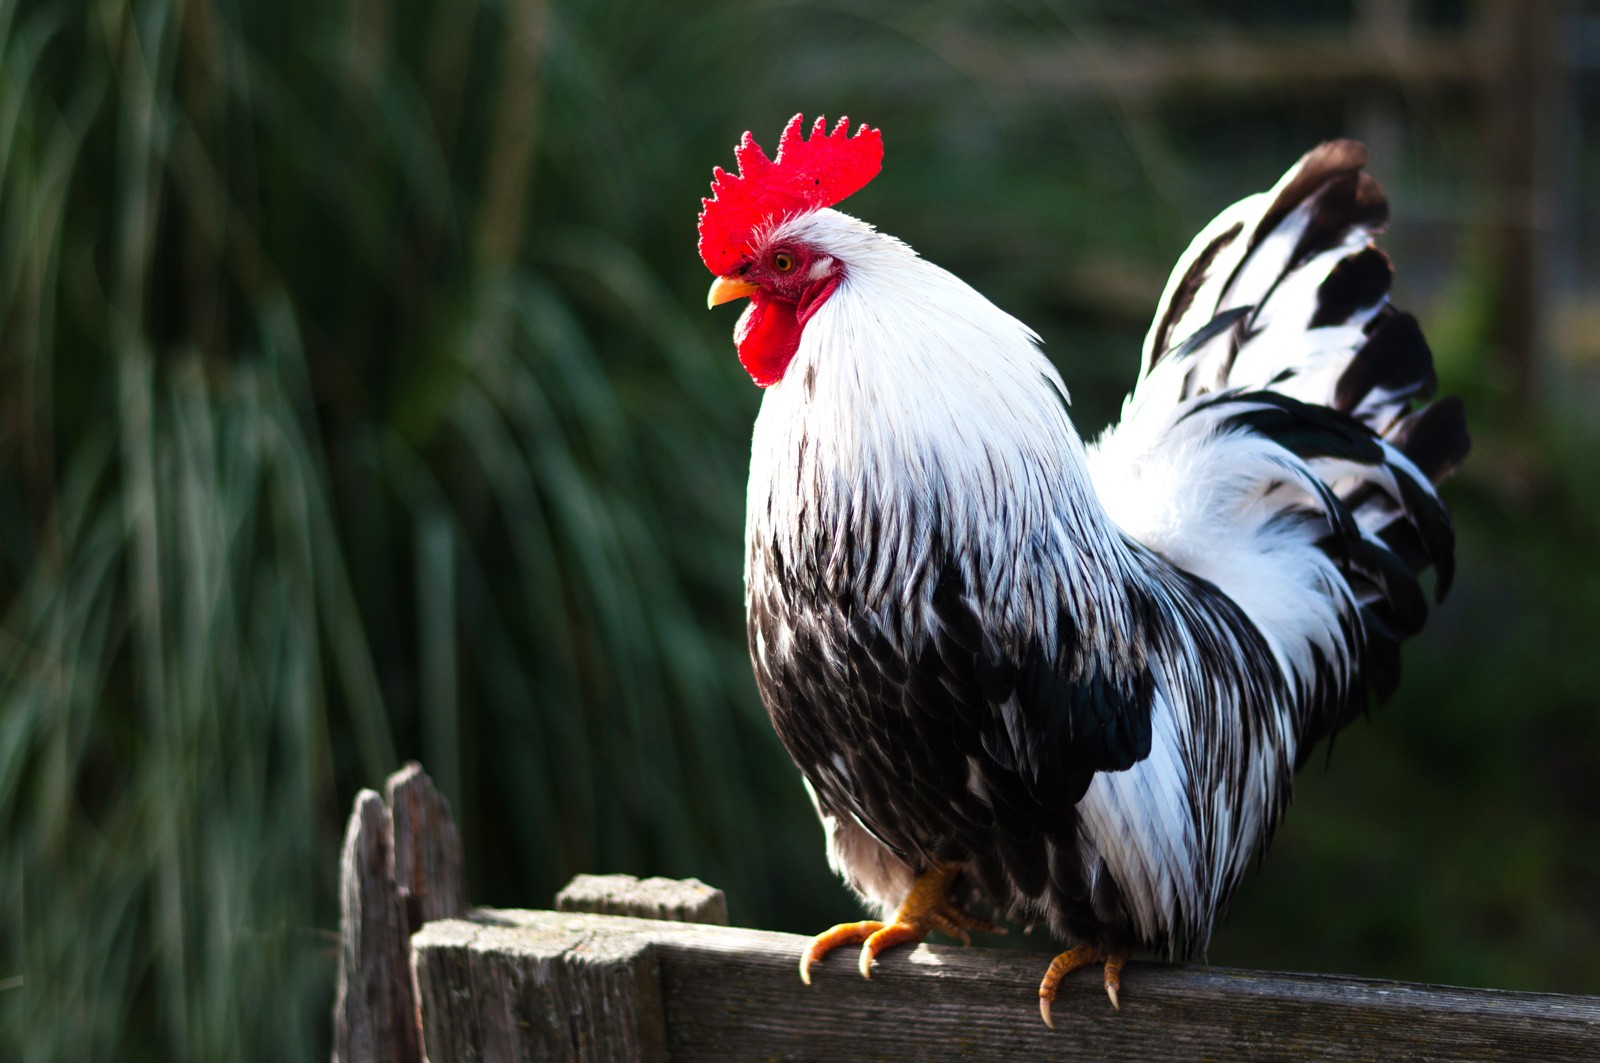 Symbolic Meaning of the Rooster